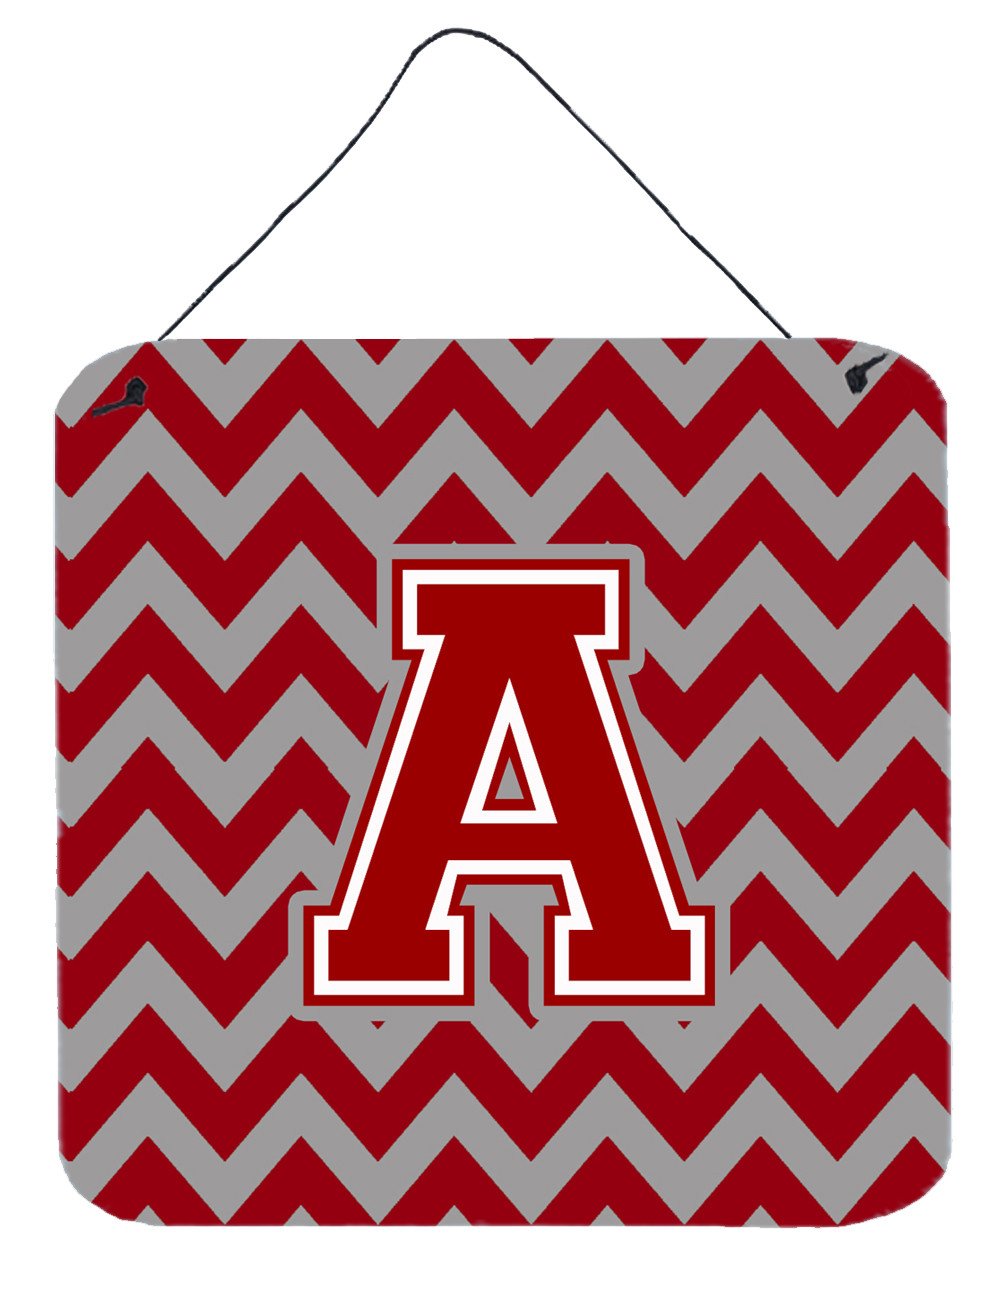 Letter A Chevron Maroon and White Wall or Door Hanging Prints CJ1049-ADS66 by Caroline's Treasures